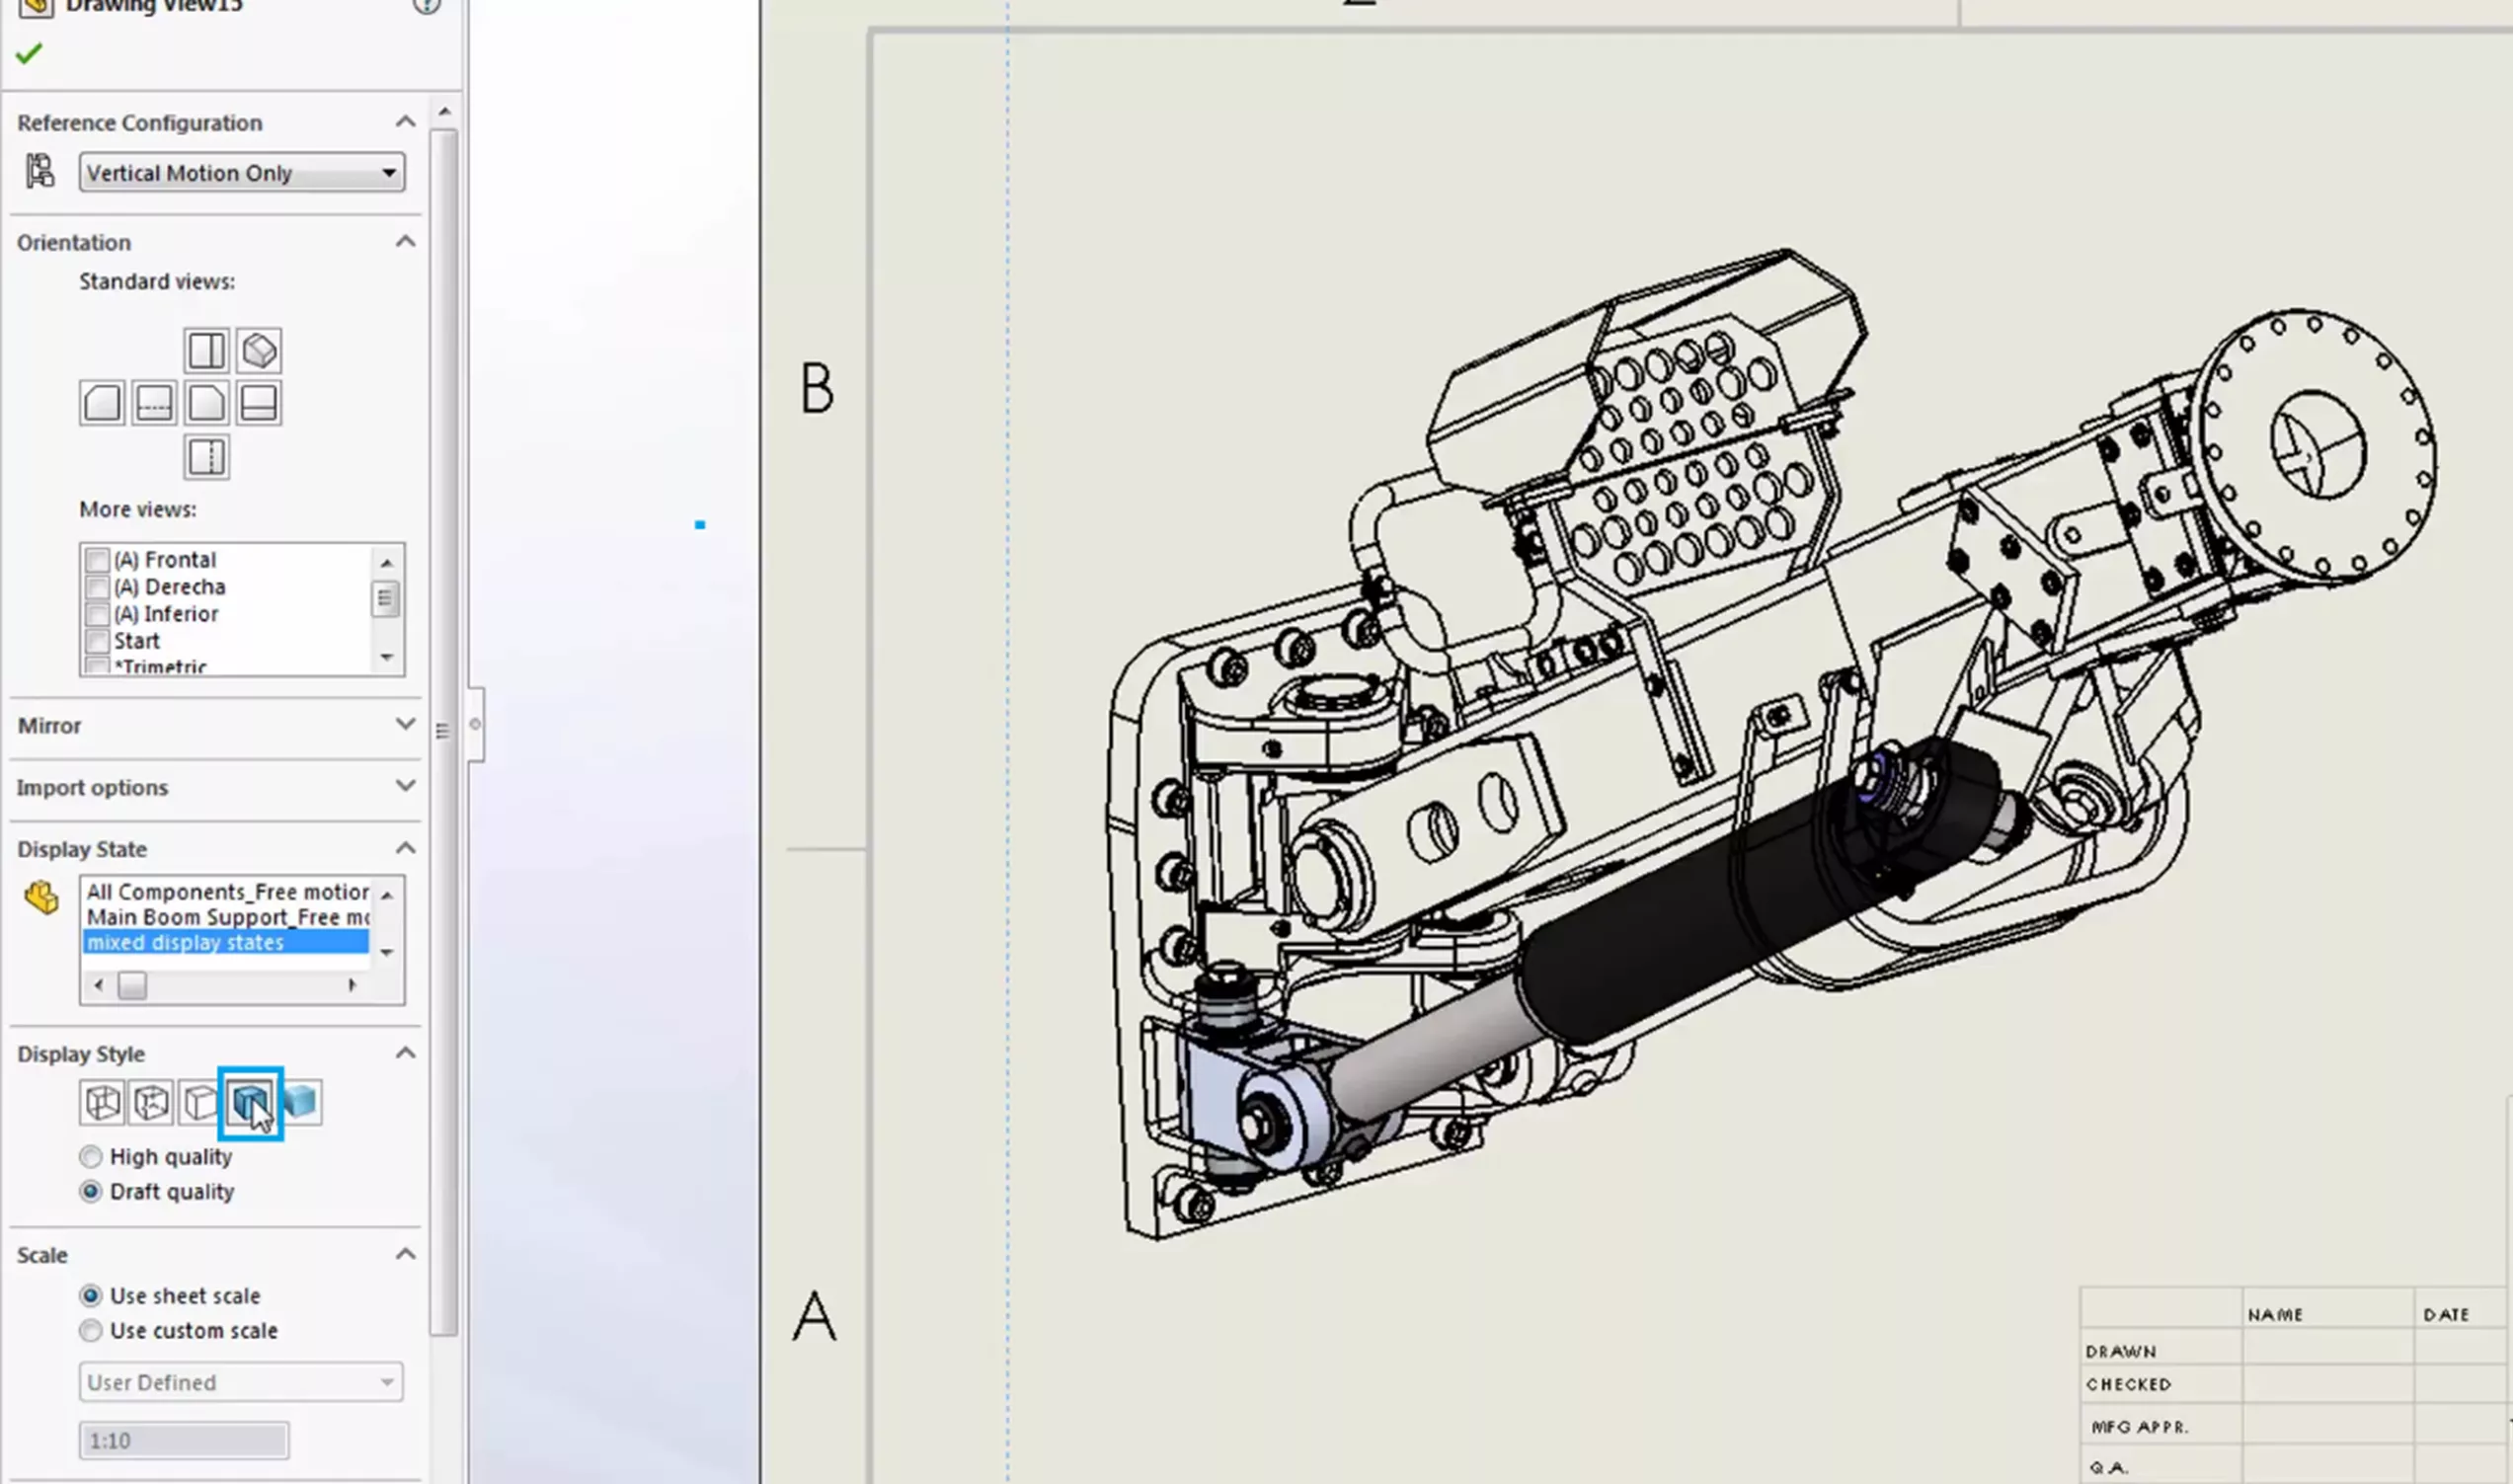 SOLIDWORKS Mixed Display States in Drawing View